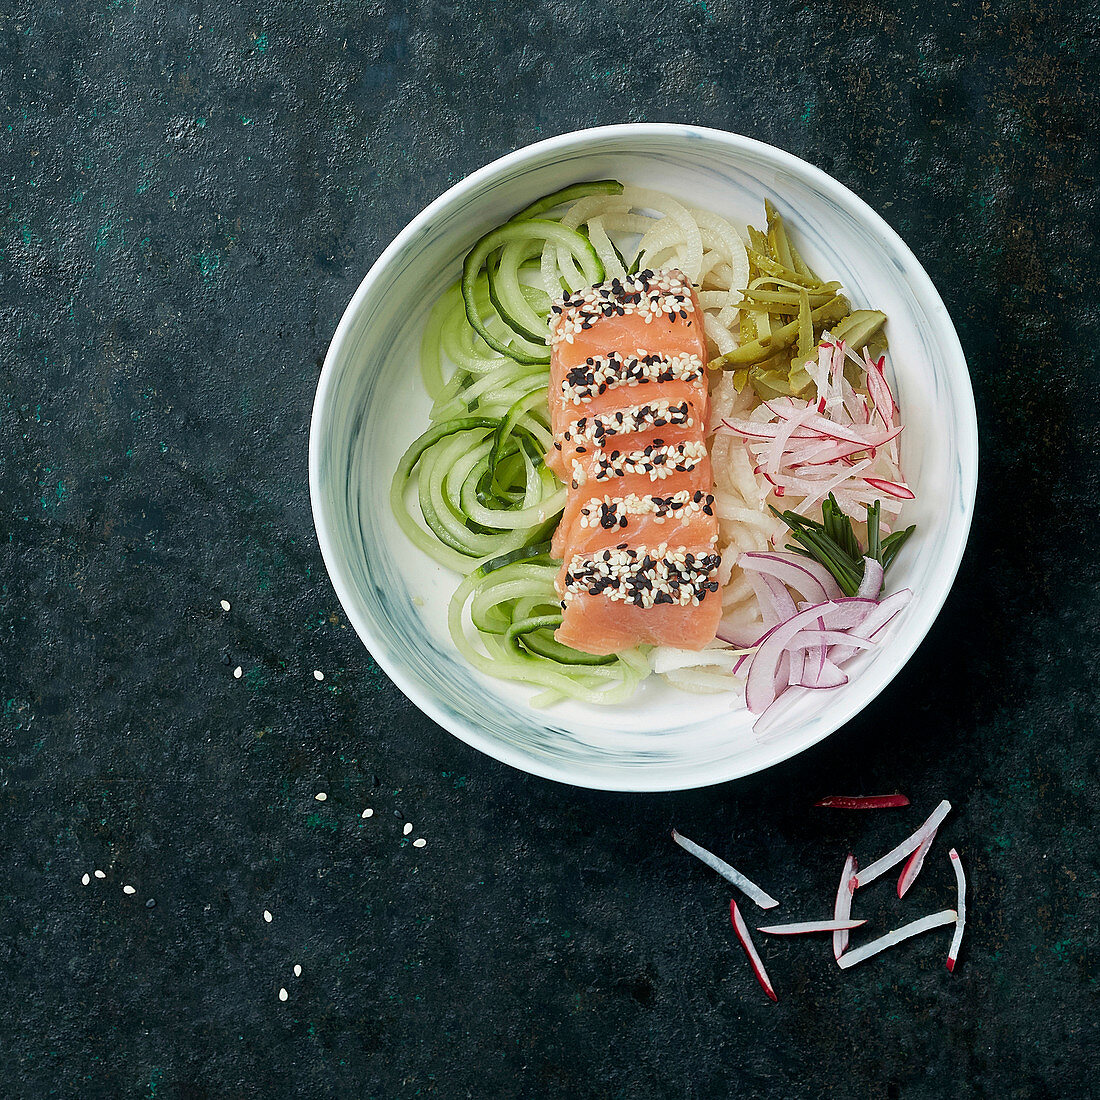 Sesame salmon sashimi with vegetable spaghetti made of courgette, cucumber, onion and radish